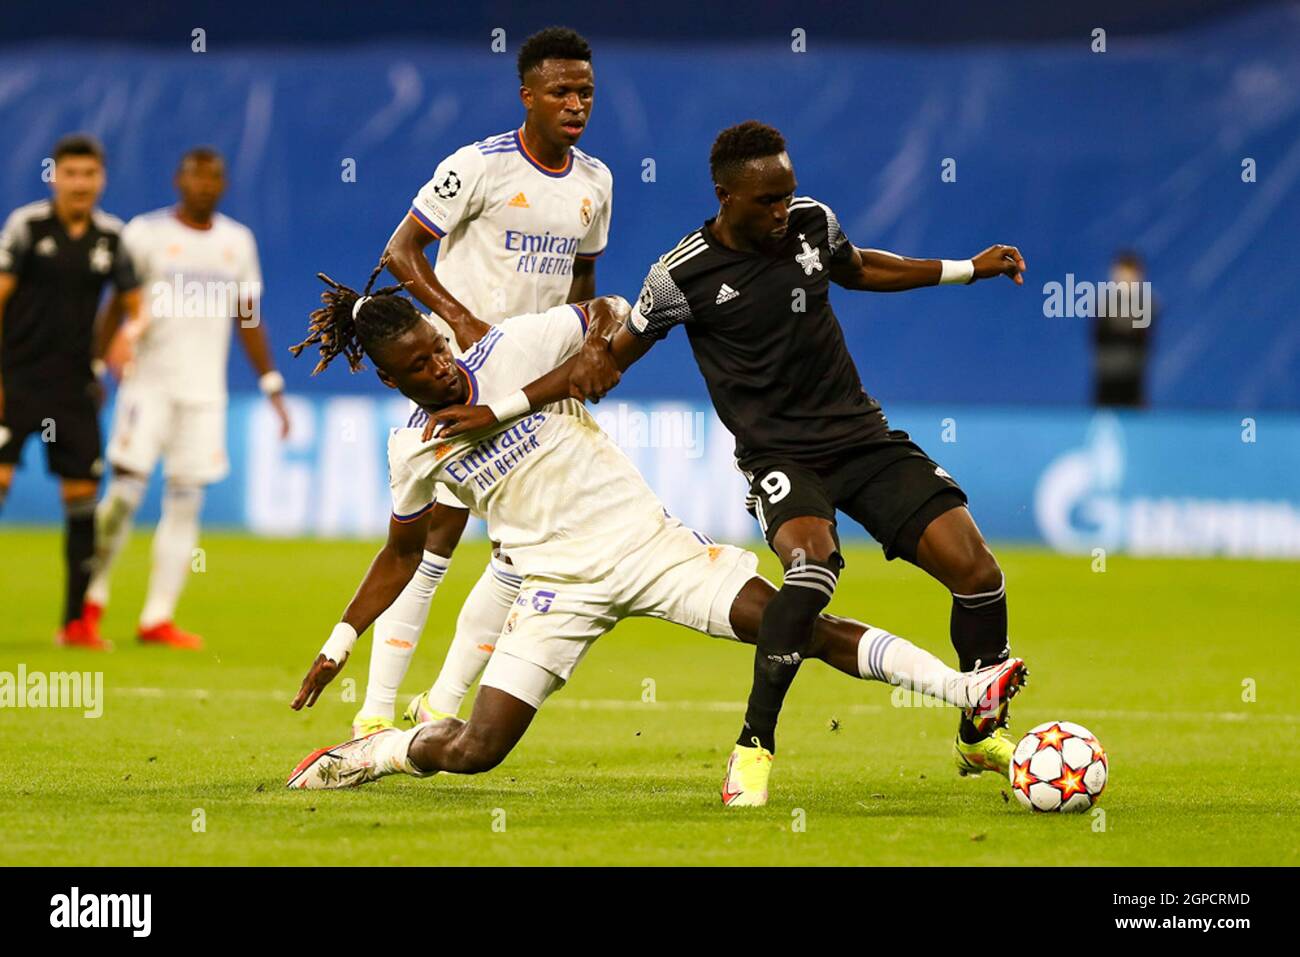 Madrid, Spain. 28th Sep, 2021. Real Madrid's Eduardo Camavinga (L, front) vies with Sheriff's Adama Traore (R) during the UEFA Champions League Group D match between Real Madrid CF and FC Sheriff Tiraspol in Madrid, Spain, Sept. 28, 2021. Credit: Edward F. Peters/Xinhua/Alamy Live News Stock Photo